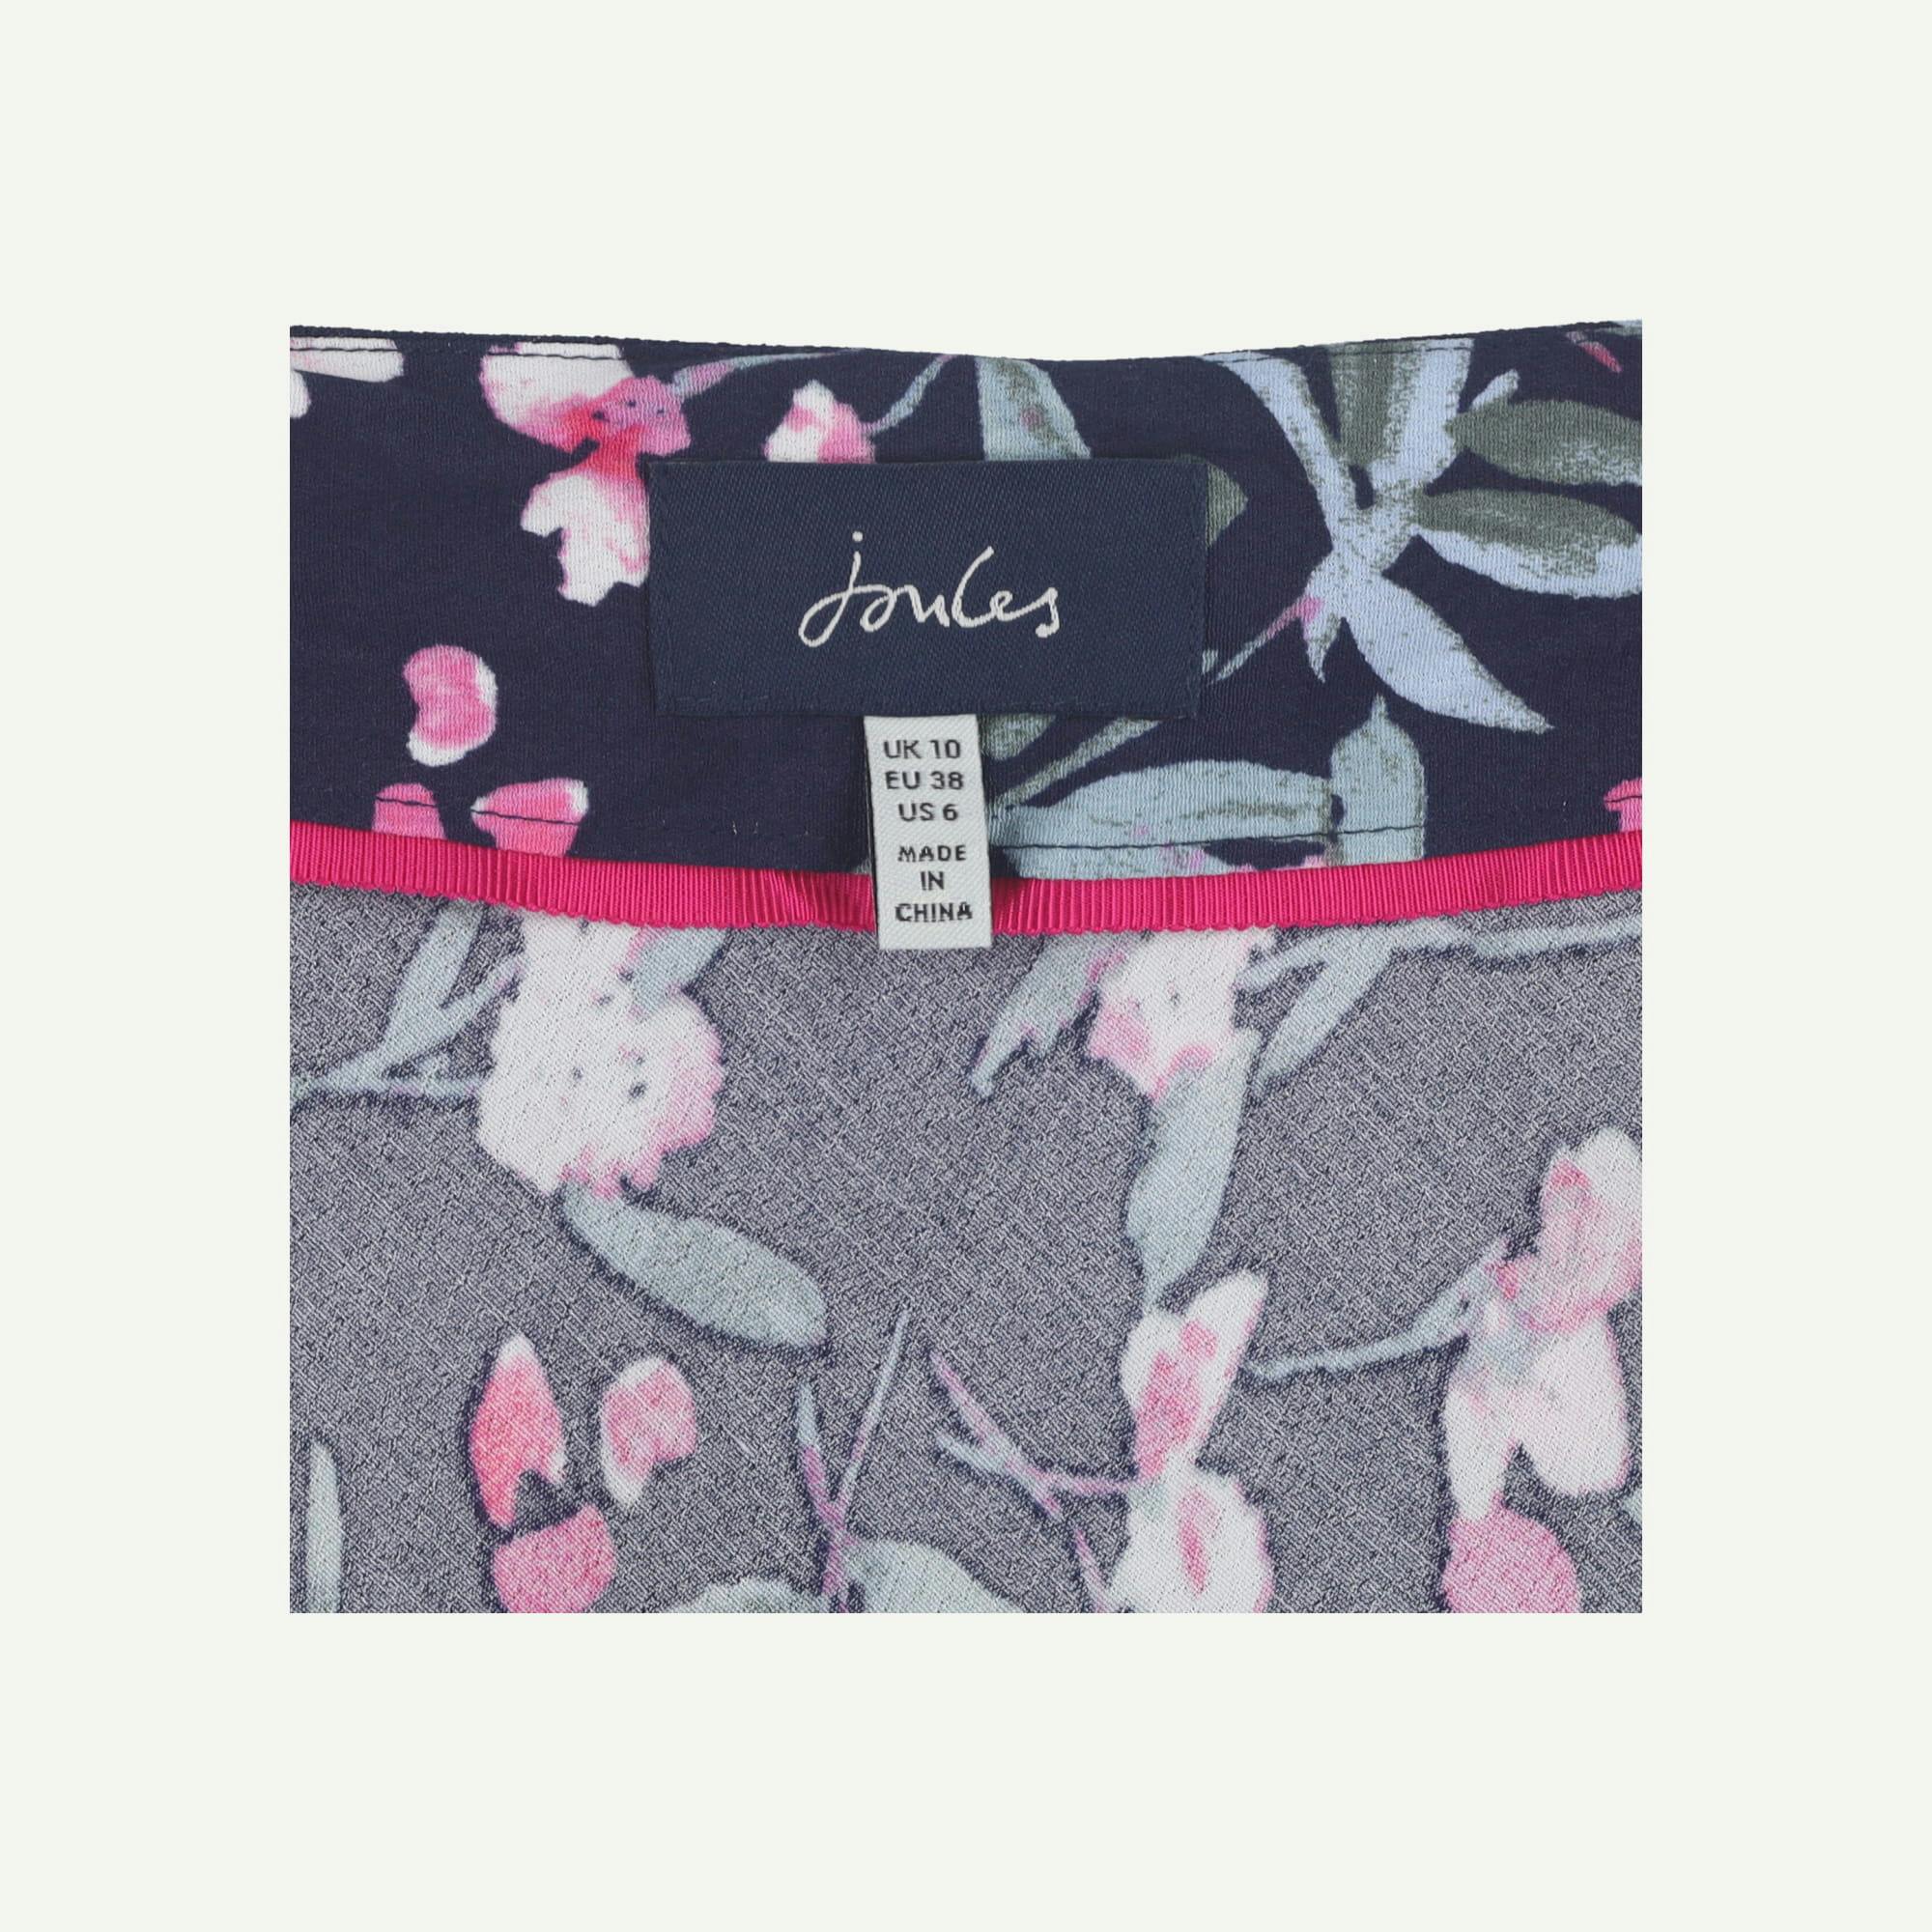 Joules As new Navy Skirt